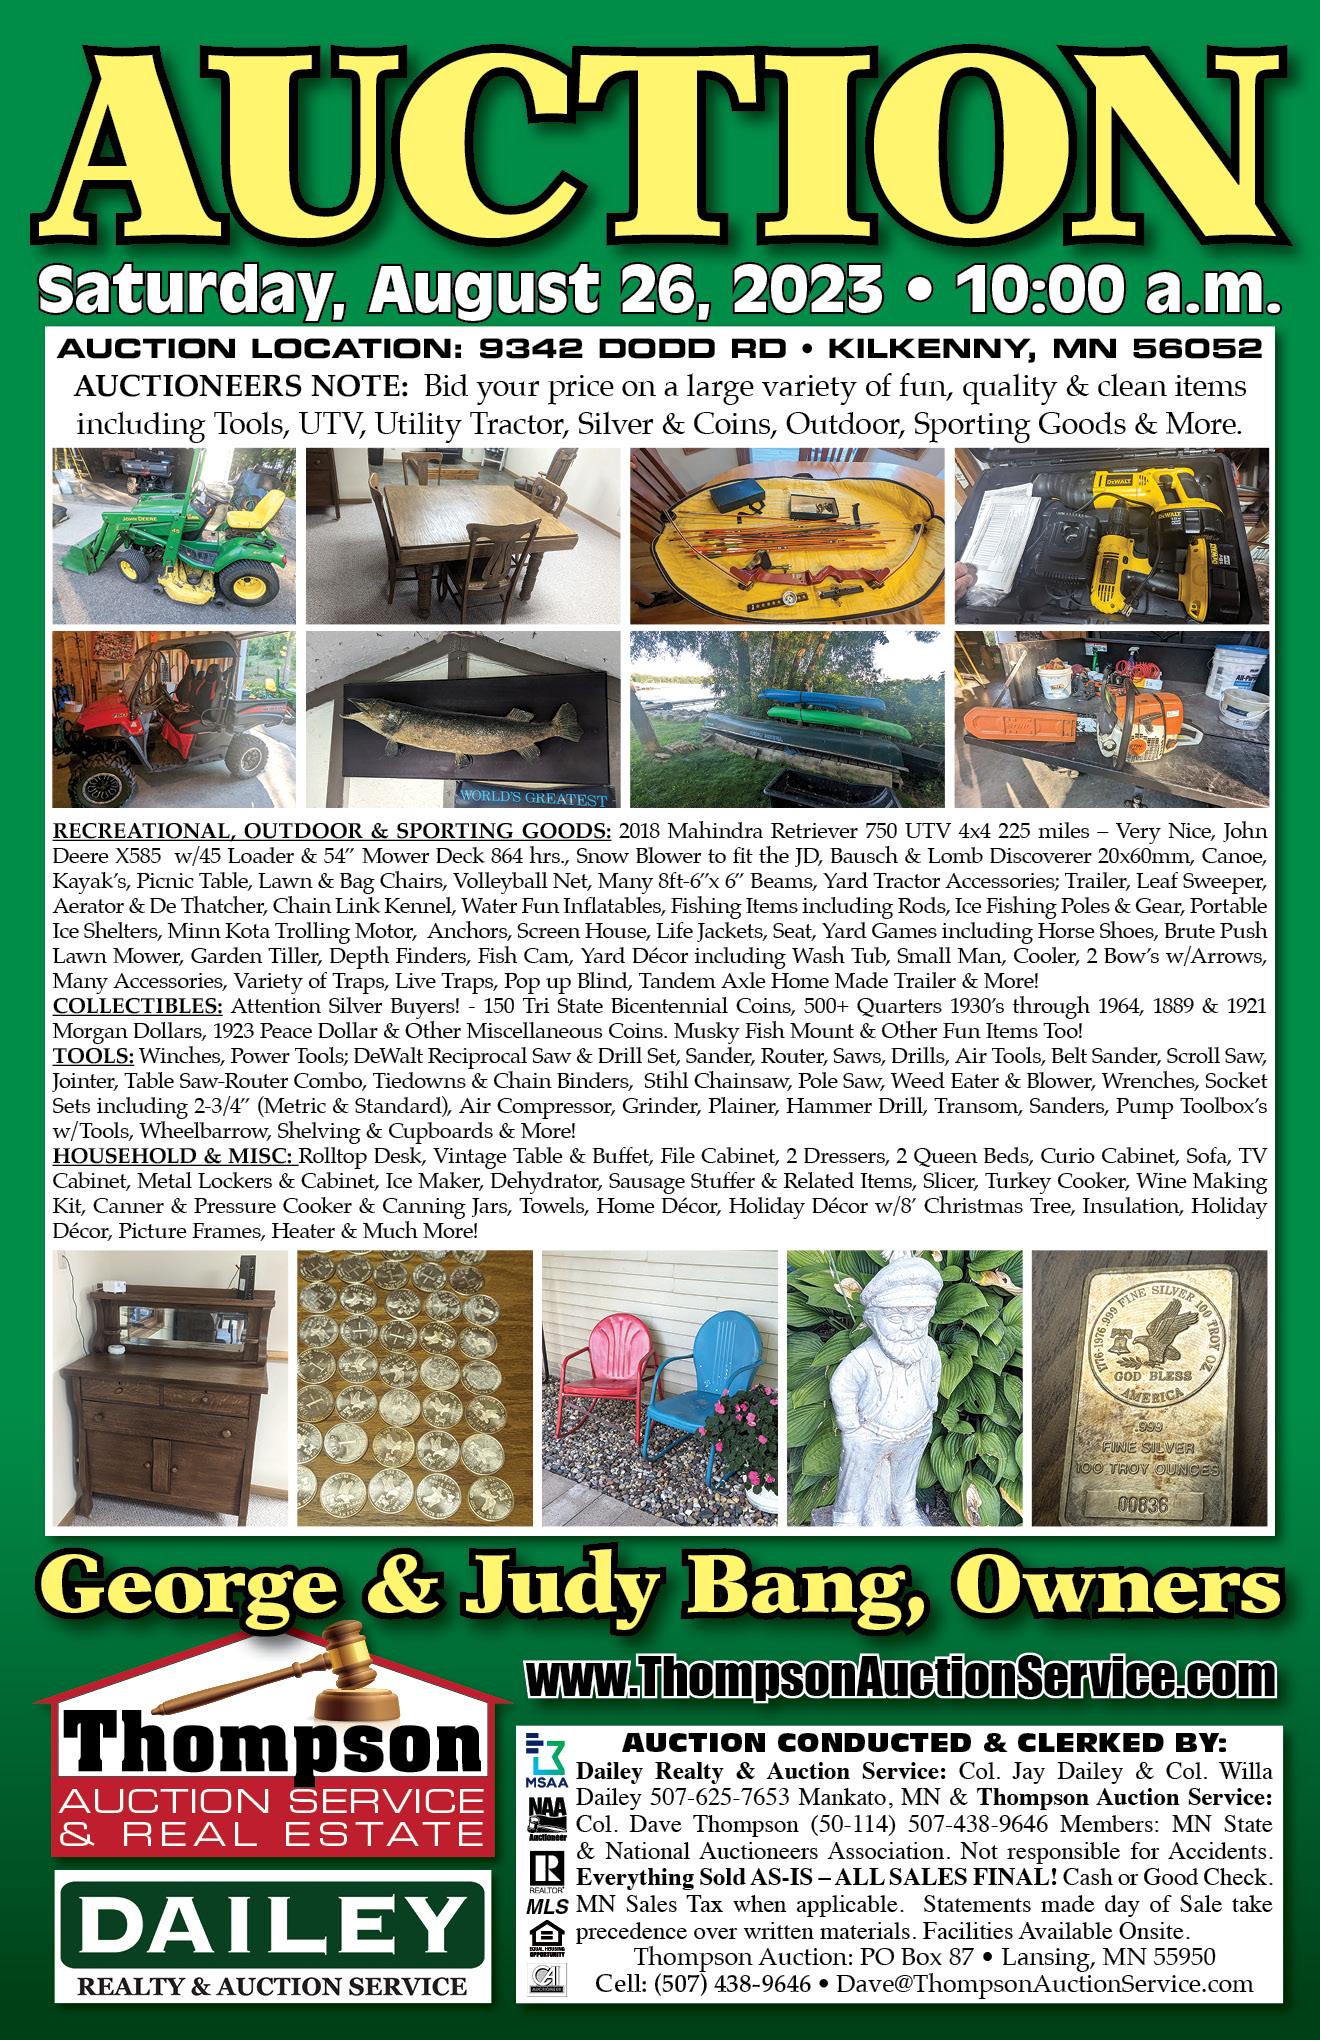 GEORGE & JUDY BANG MOVING AUCTION - LIVE